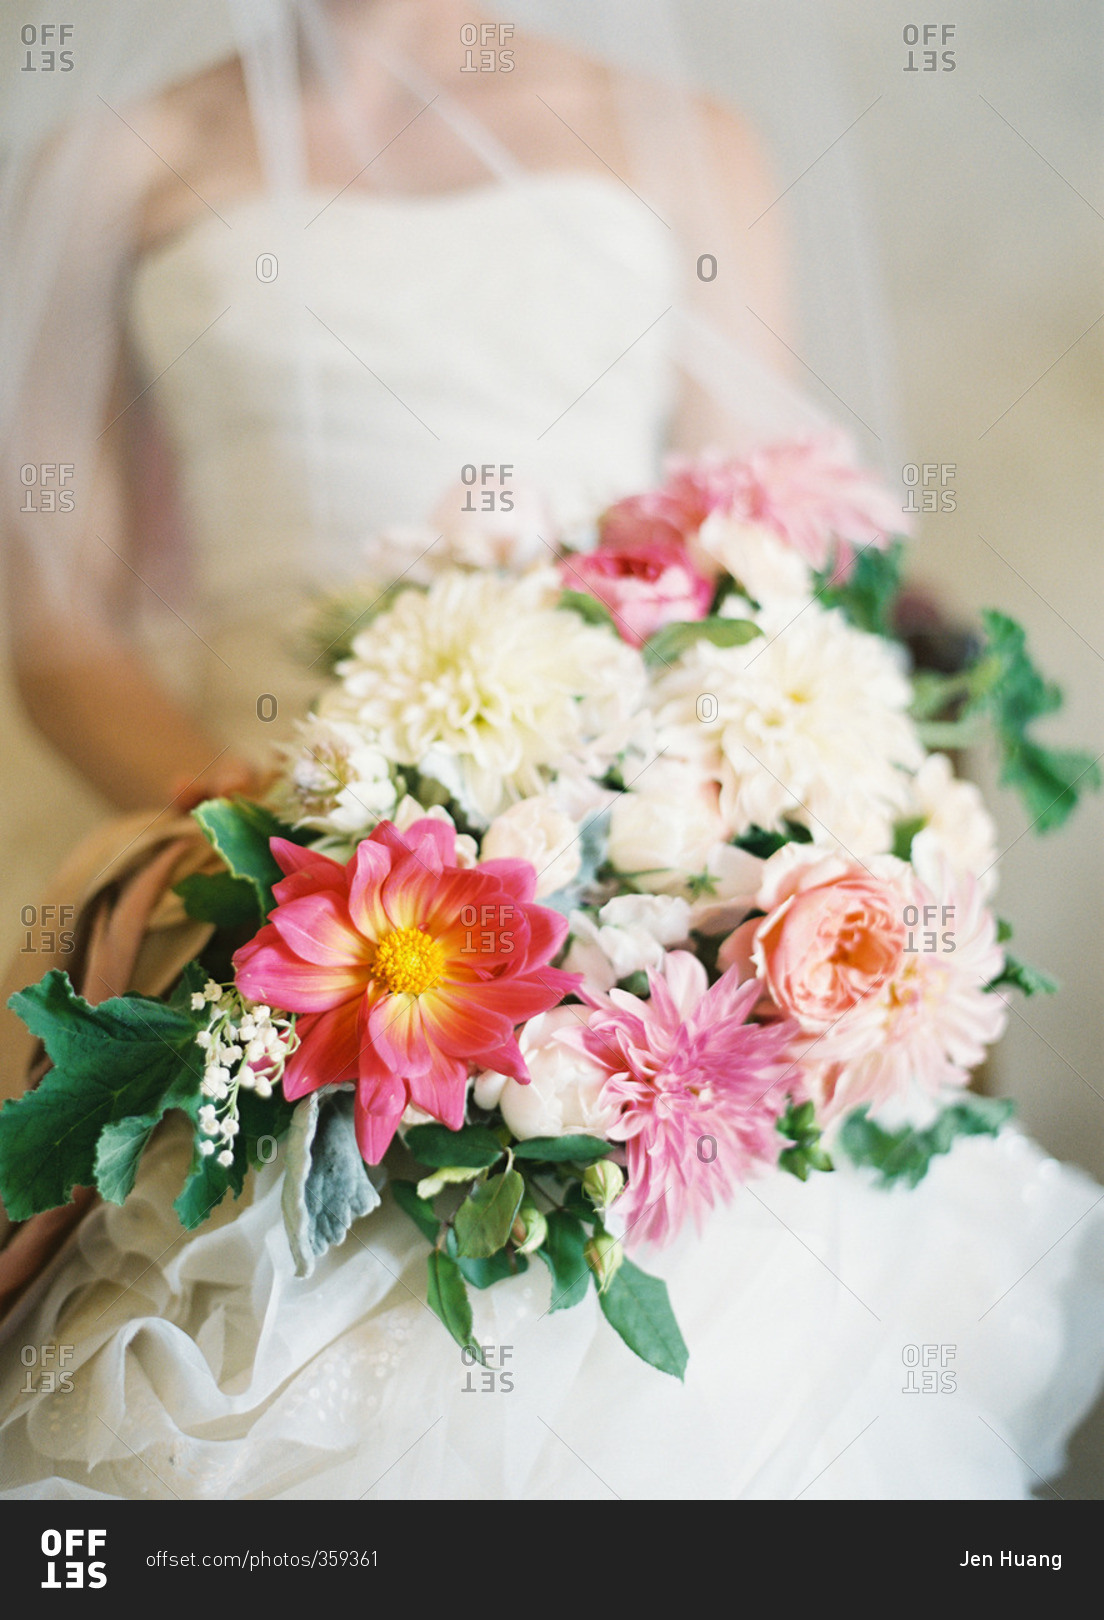 Bride holding bouquet with white and pink flowers